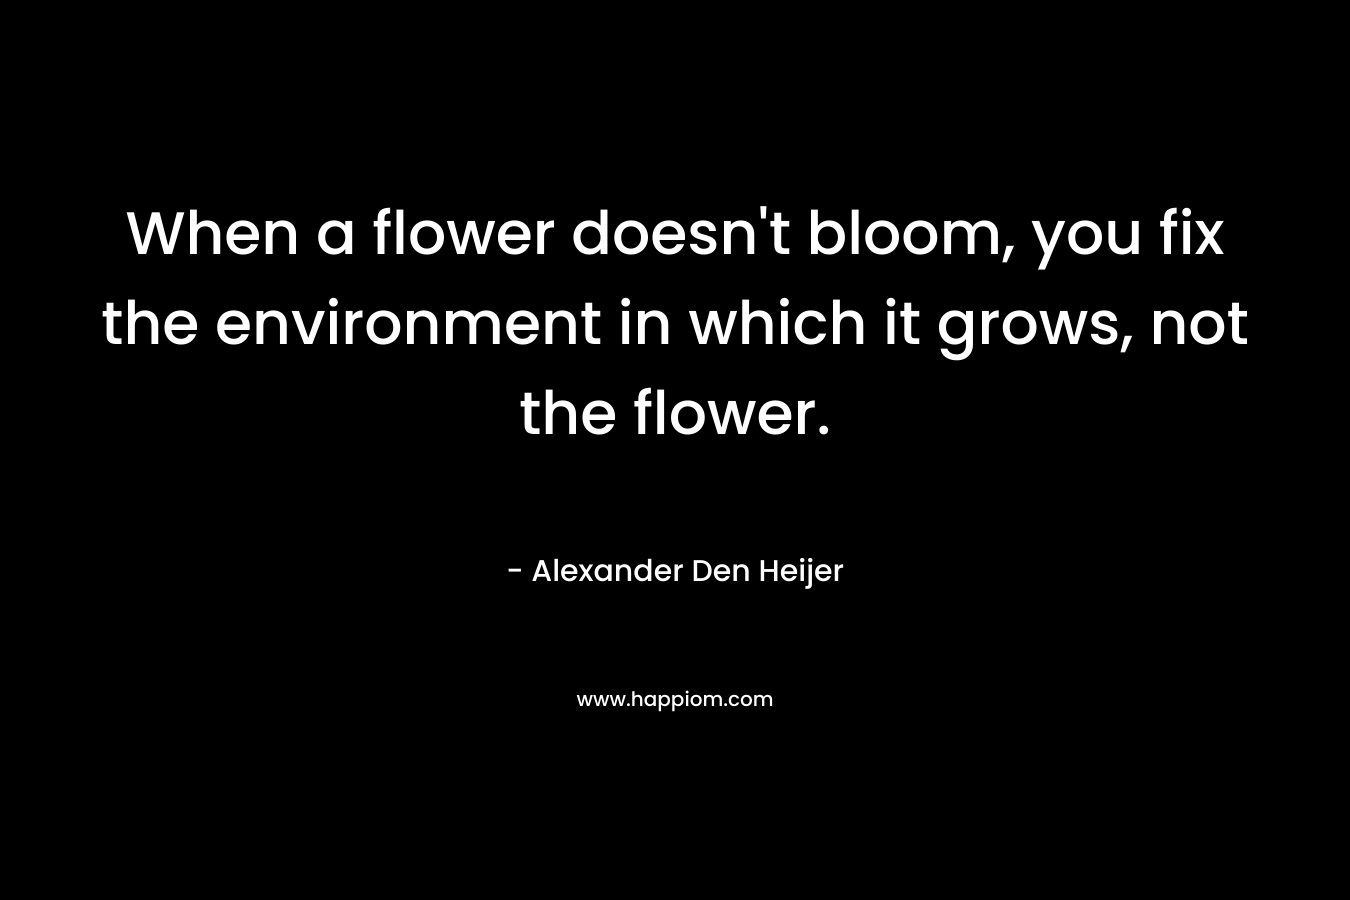 When a flower doesn't bloom, you fix the environment in which it grows, not the flower.